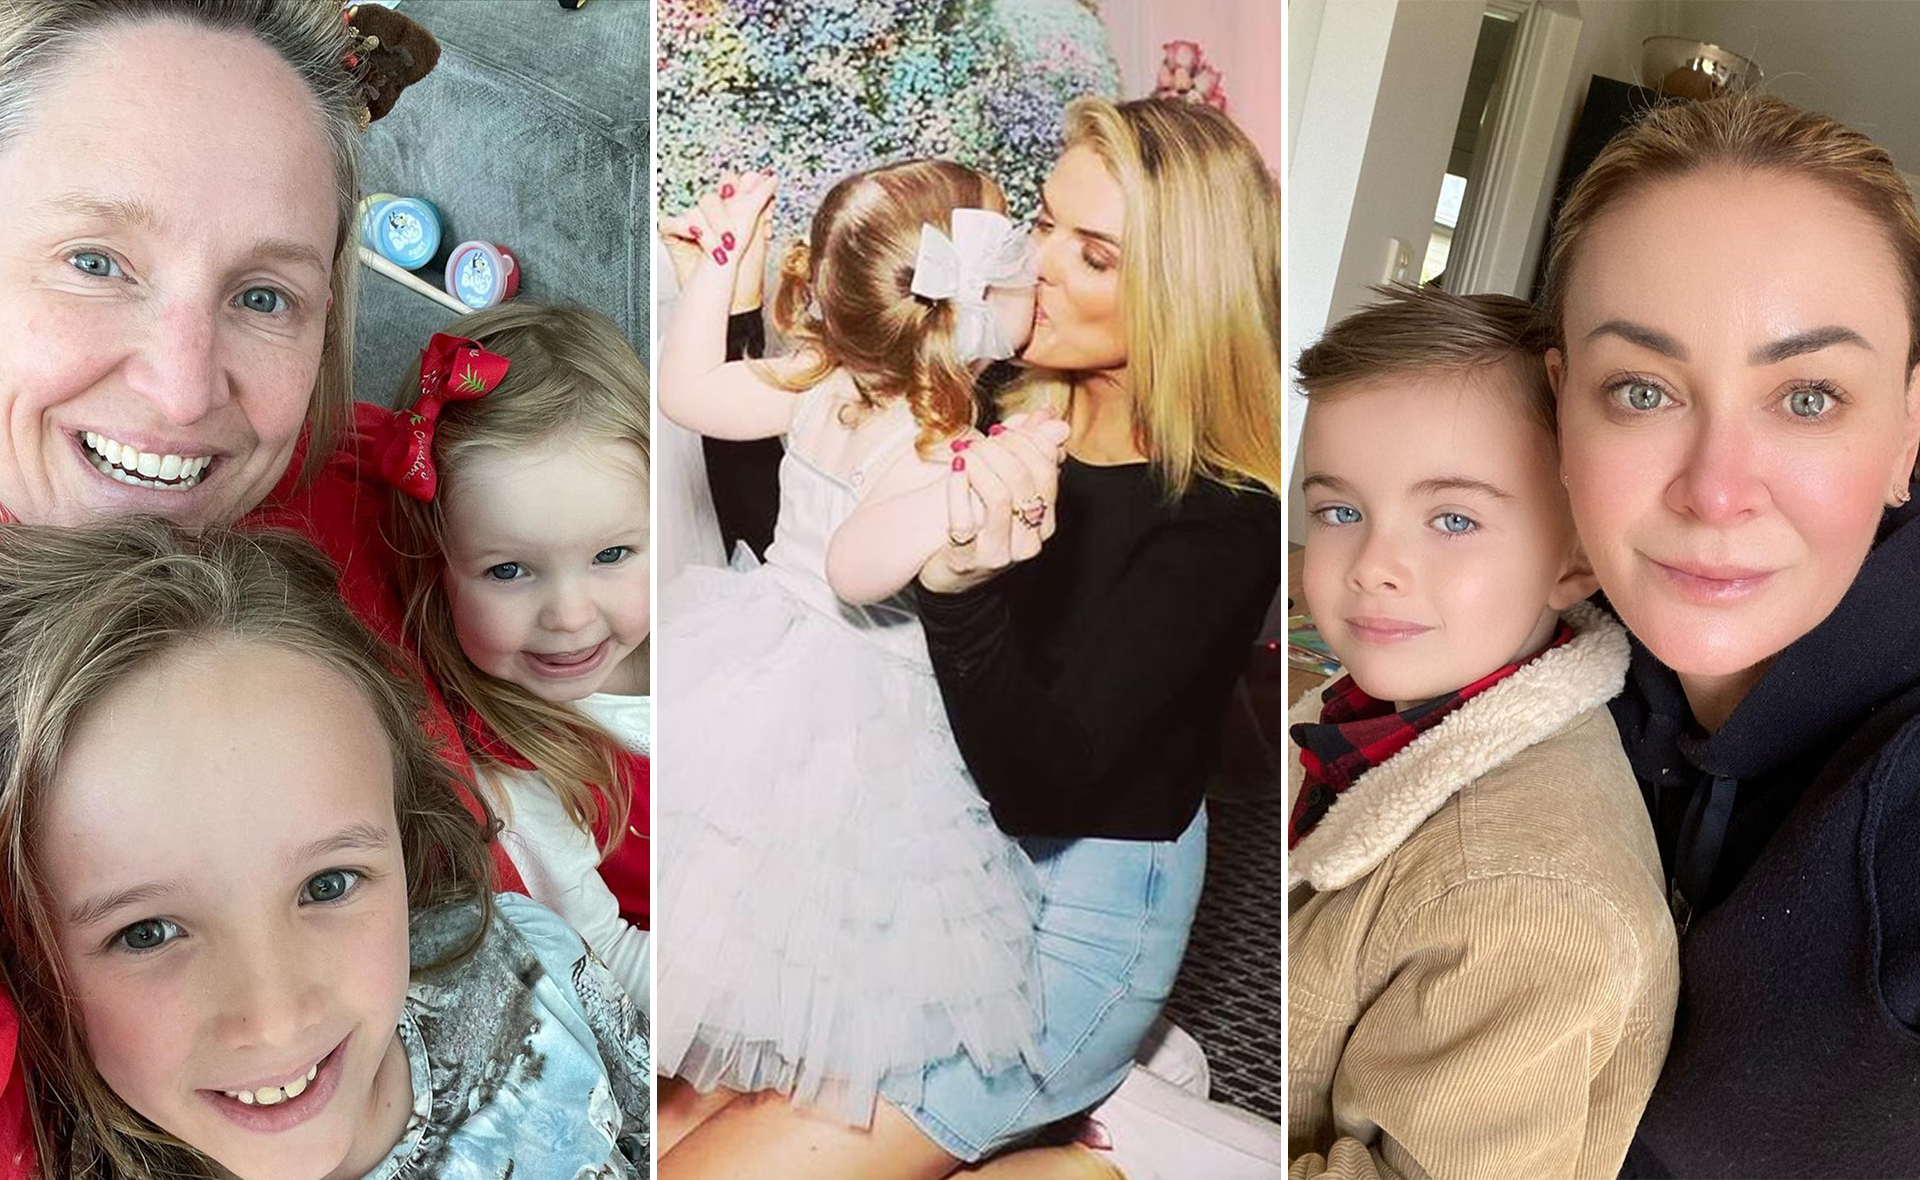 Celebrity single mums like Erin Molan and Michelle Bridges are proof there’s nothing wrong with parenting solo